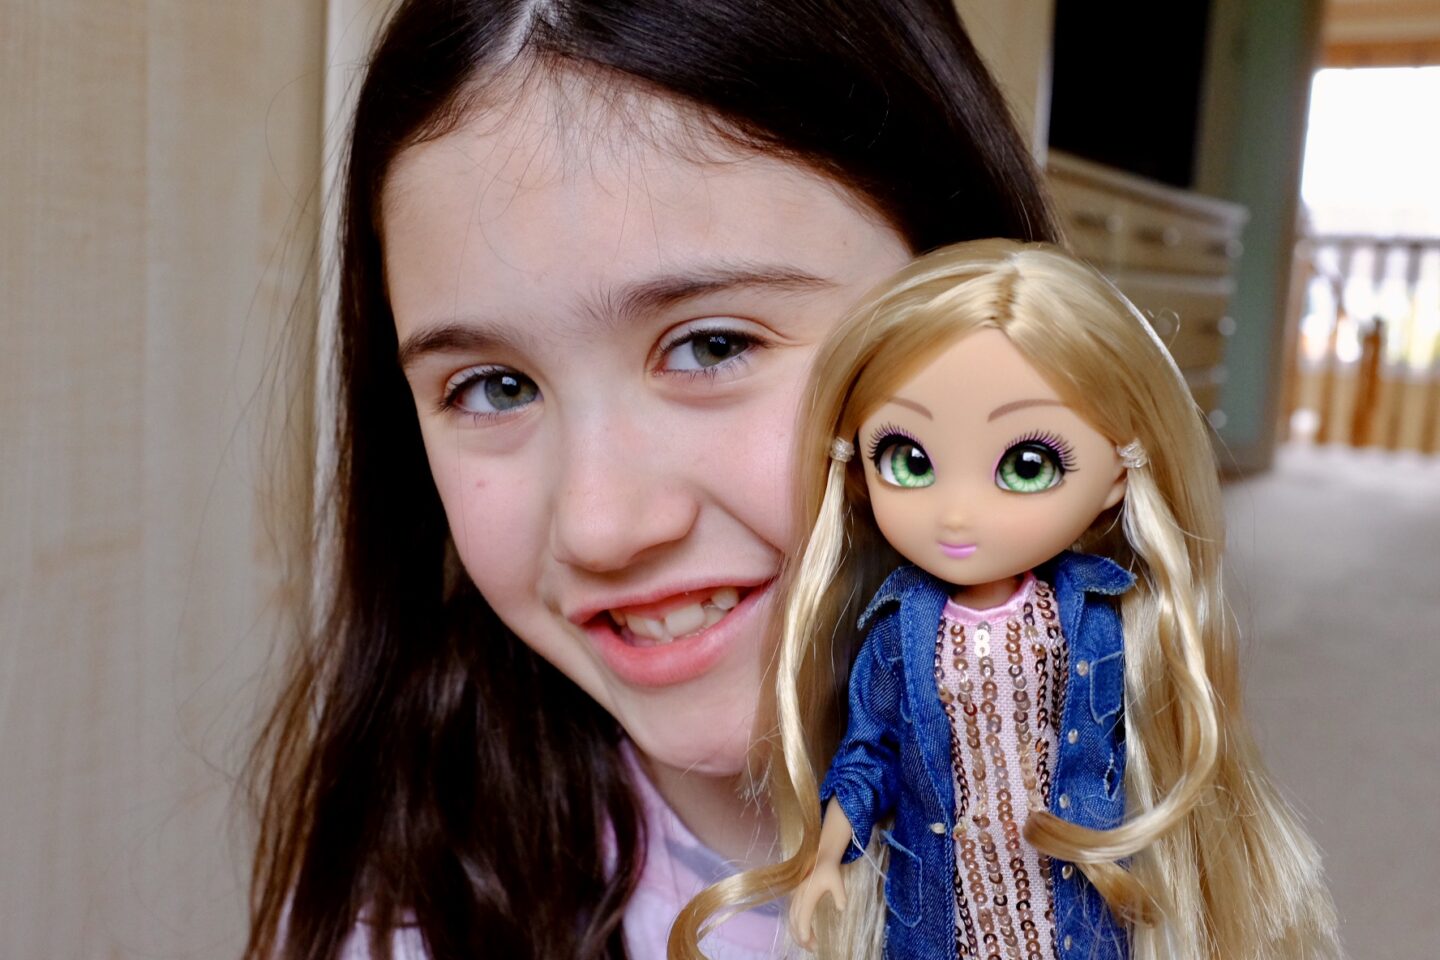 girl holding her unique eyes doll Amy